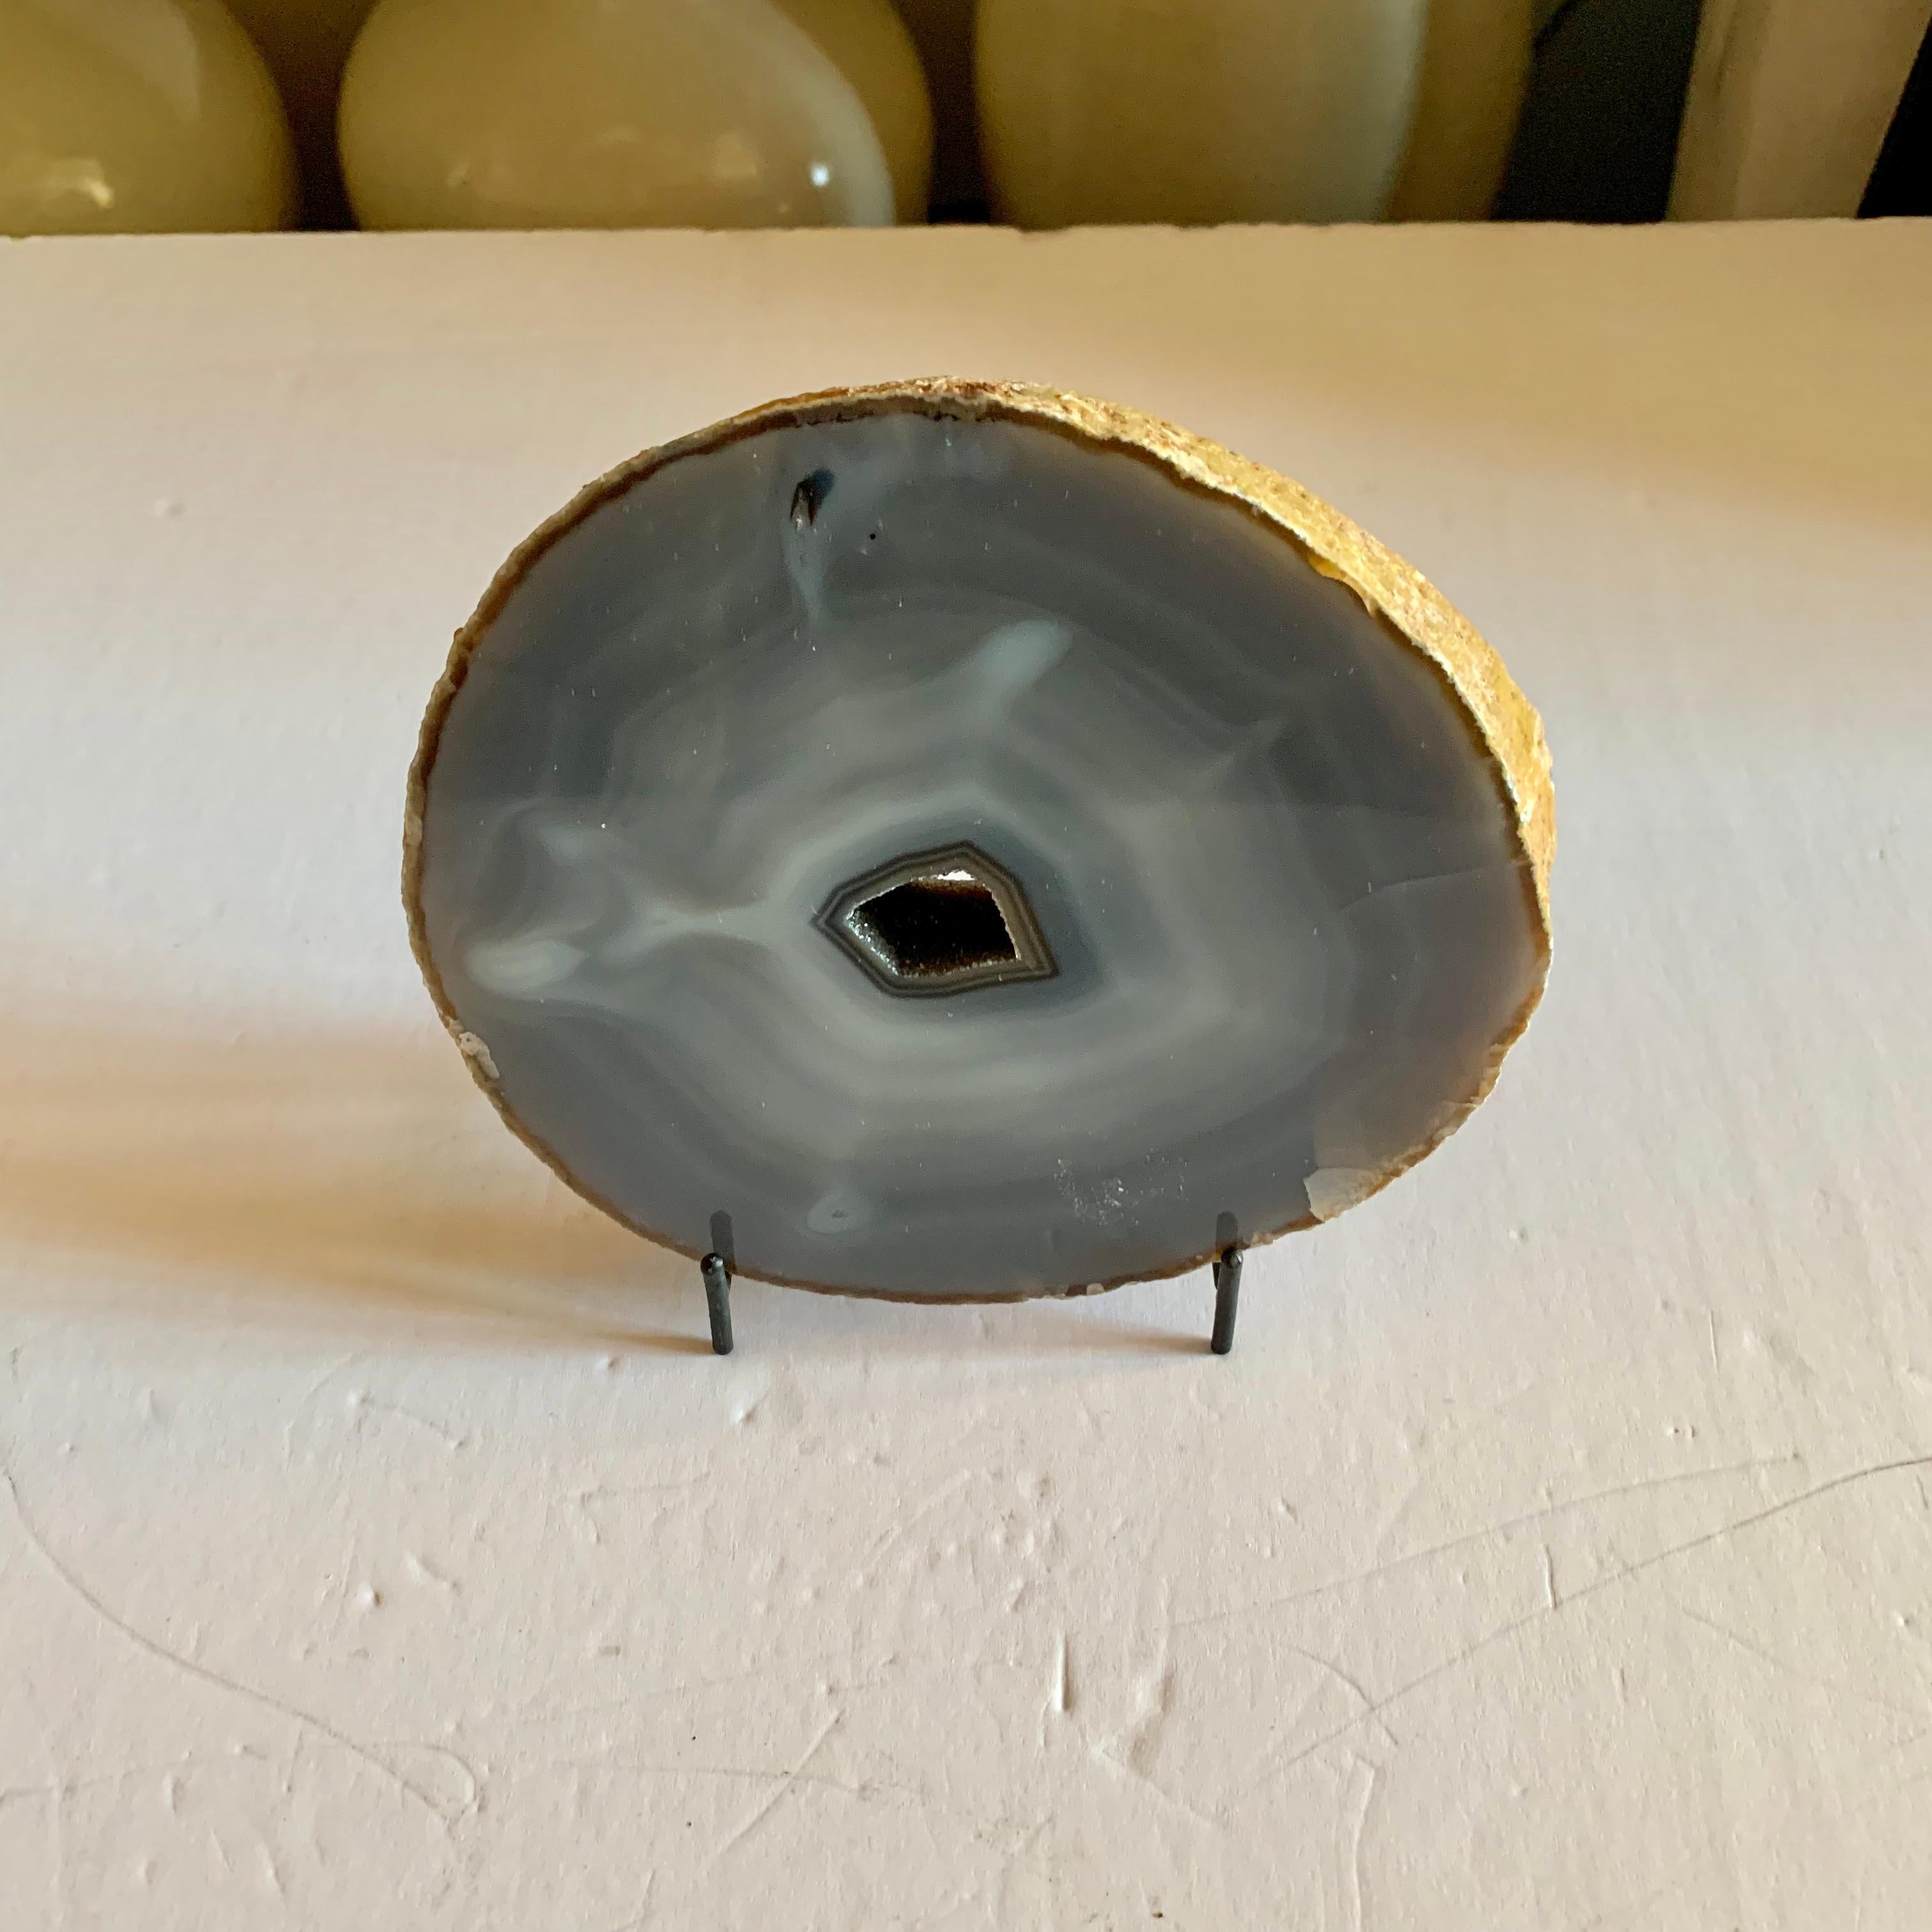 Brazilian sliced agate sculpture
Concentric circles of grey color with hollowed centre
One of several pieces from a large collection of agate.